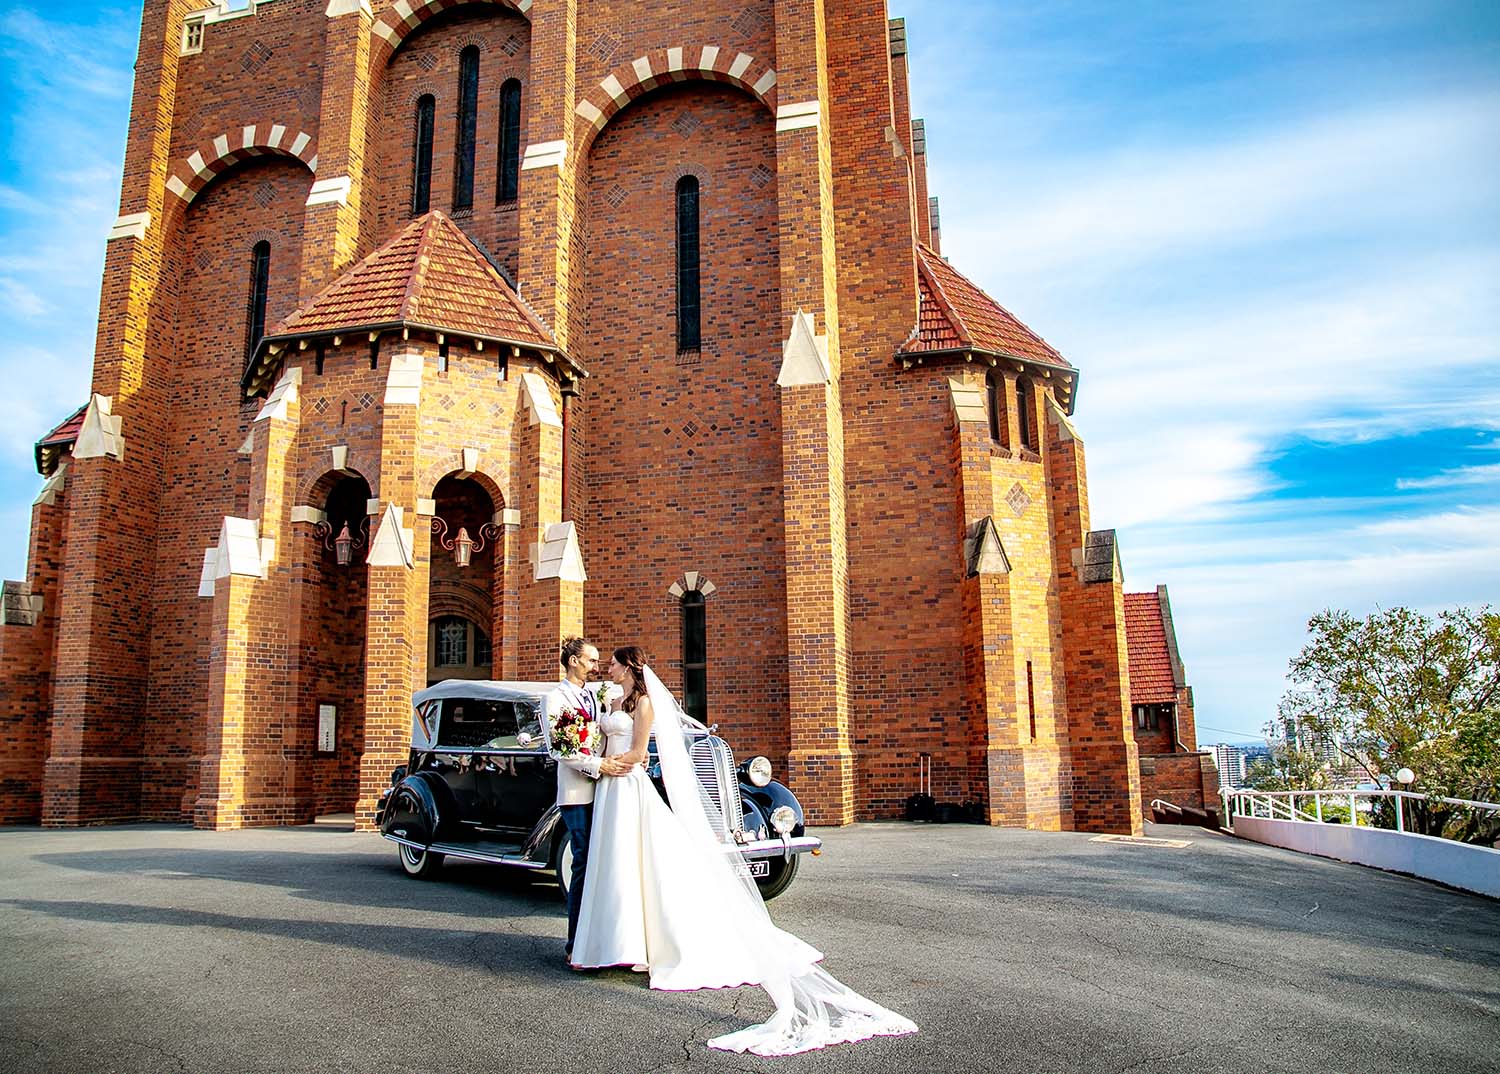 Wedding Photography - in front of church